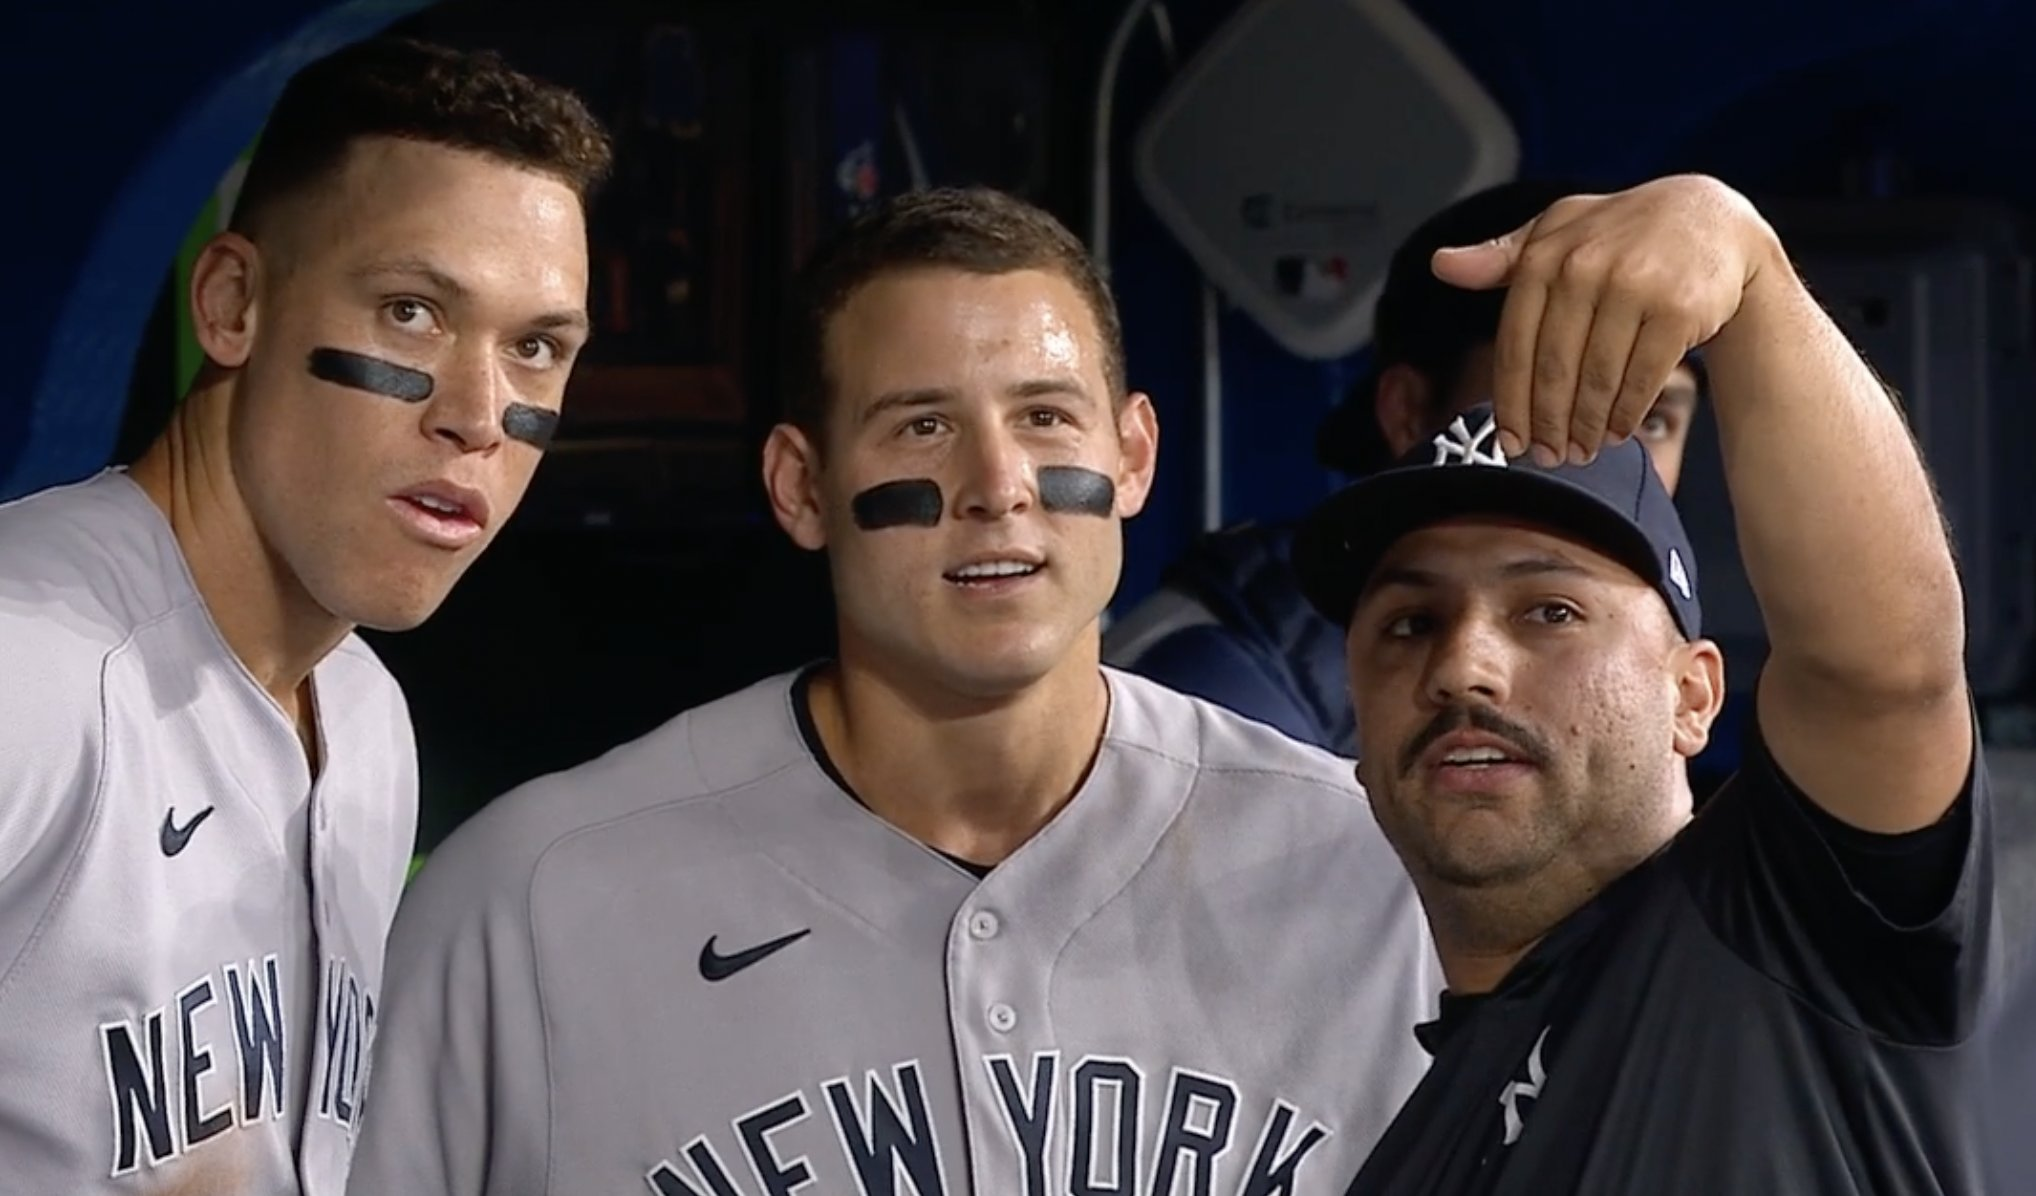 Yankees star Aaron Judge happy to give back as coach of fan